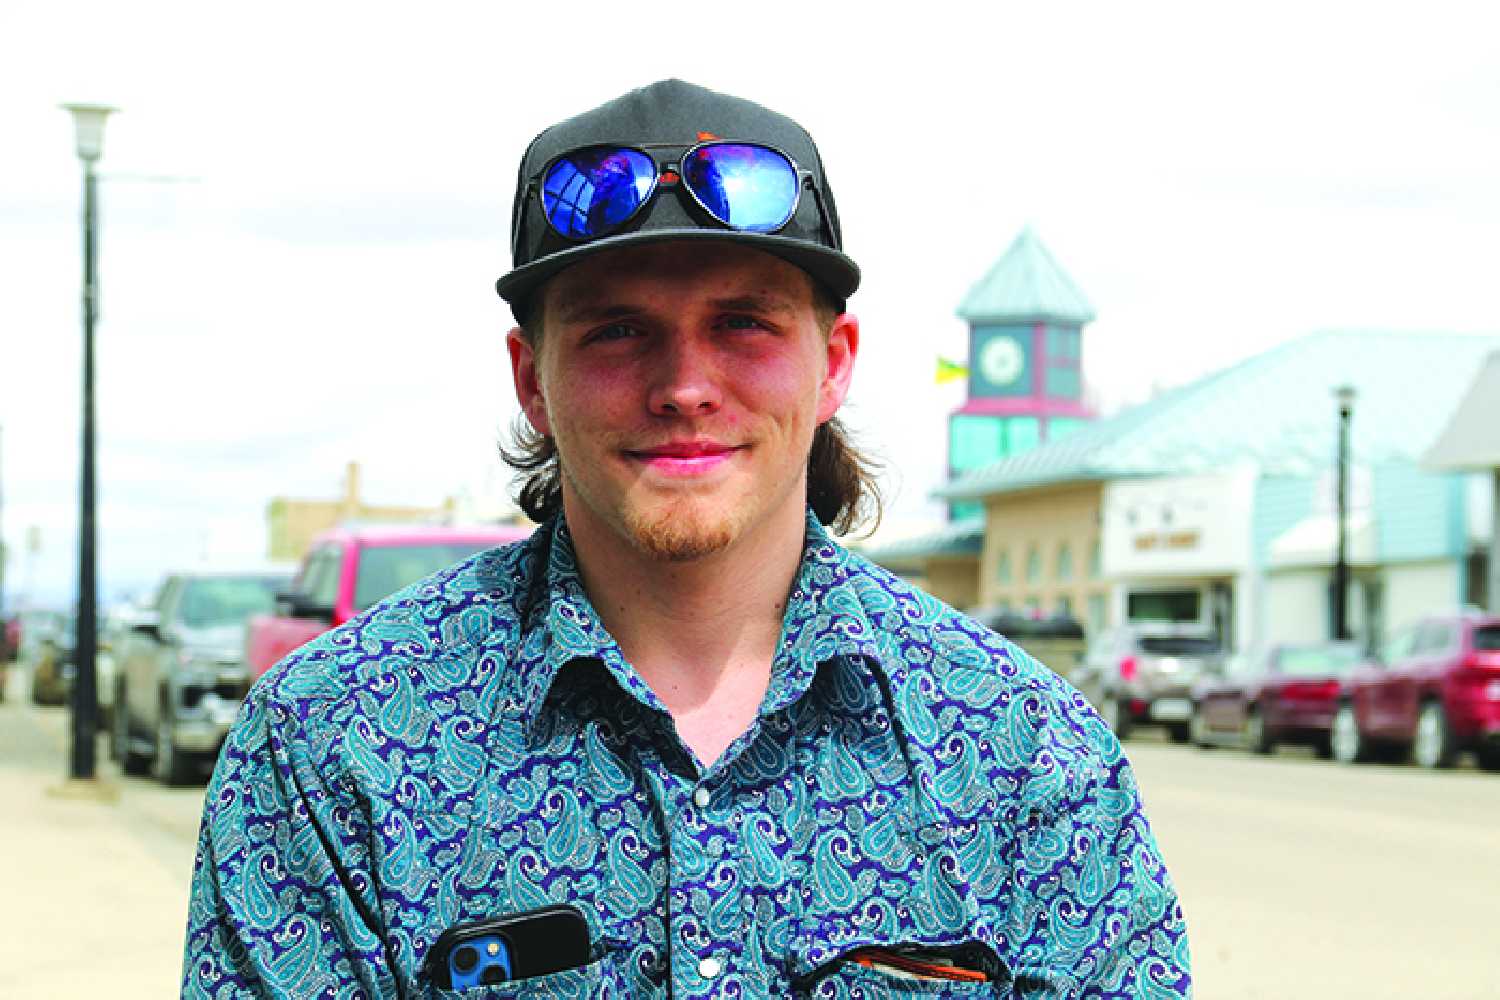 Levi Jamieson will be presented with the Saskatchewan Junior Citizen of the Year award by Lieutenant-Governor Russ Mirasty on May 30 at Government House in Regina